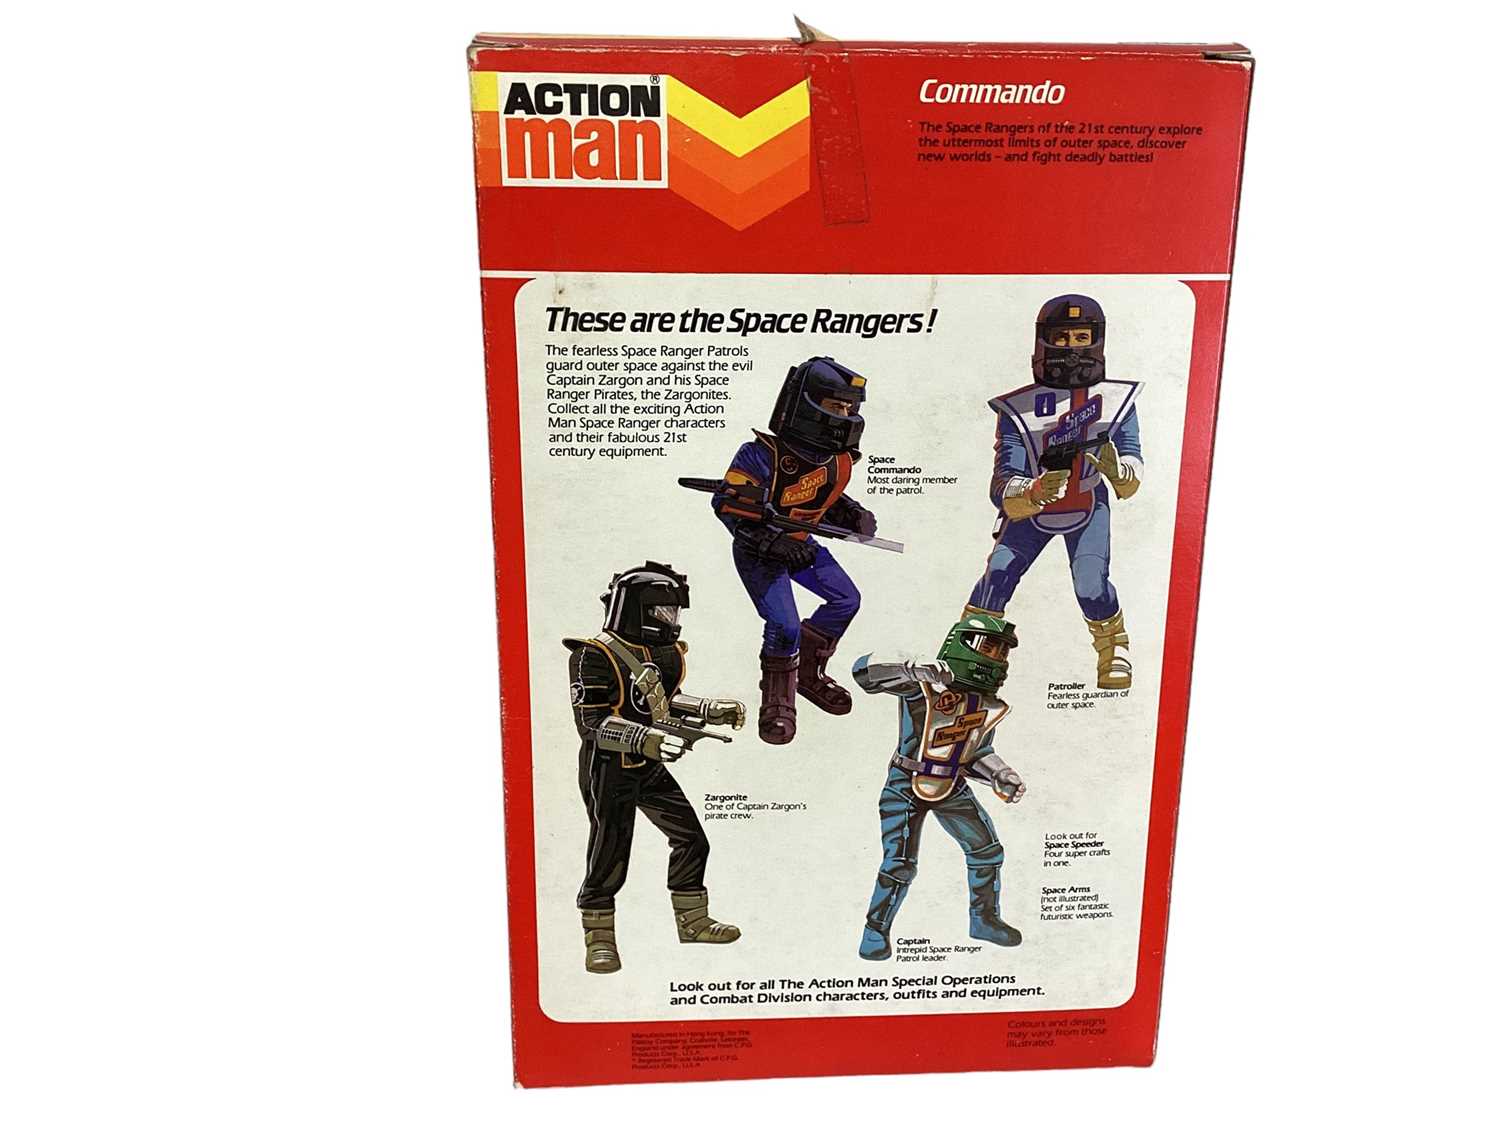 Palitoy ( 1977-1983) Action Man Space Ranger Commando Outfit, boxed with bubblepack, No.934827 (1) - Image 2 of 2